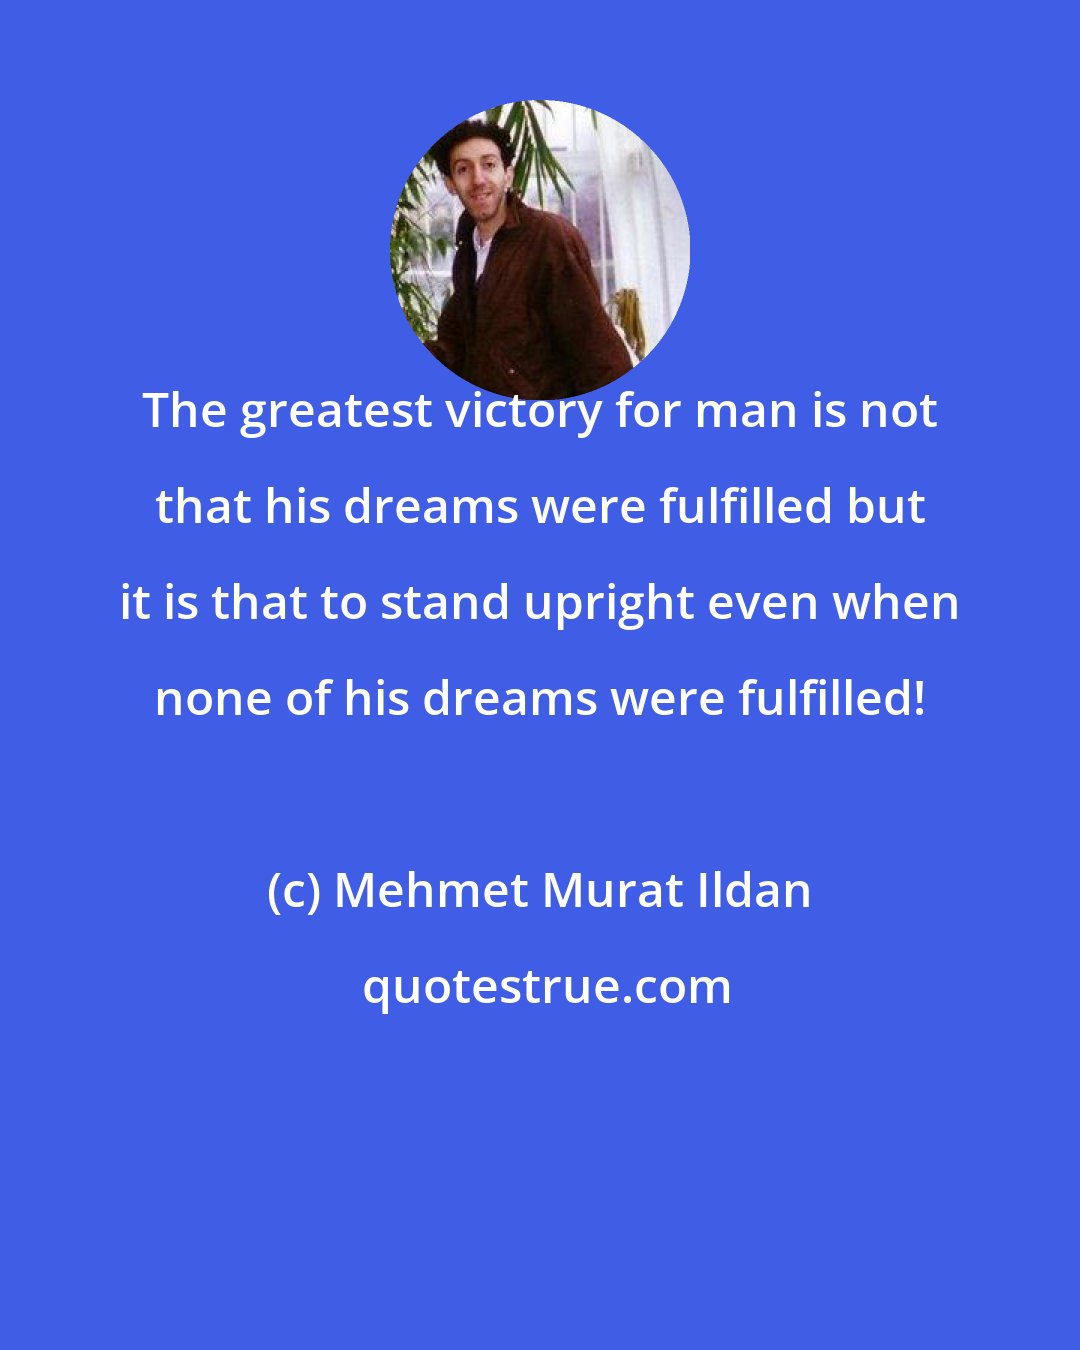 Mehmet Murat Ildan: The greatest victory for man is not that his dreams were fulfilled but it is that to stand upright even when none of his dreams were fulfilled!